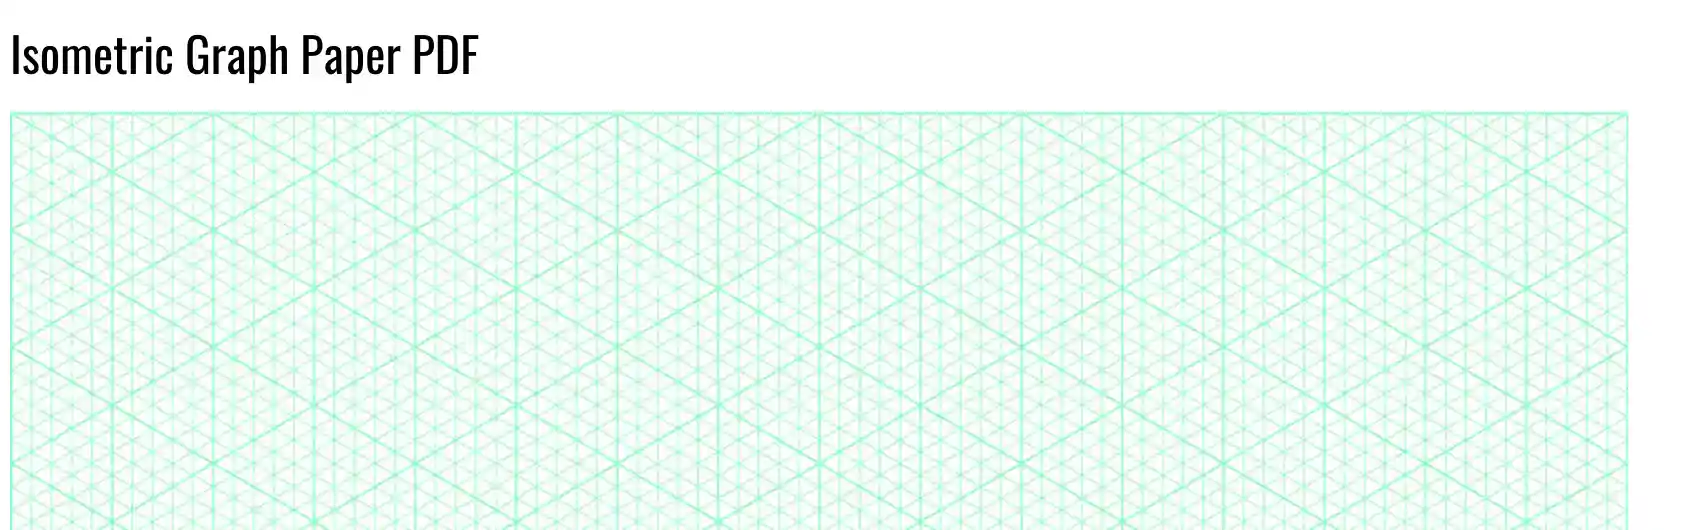 Virtual Graph Paper: Draw Your Patterns Online on a Virtual Grid